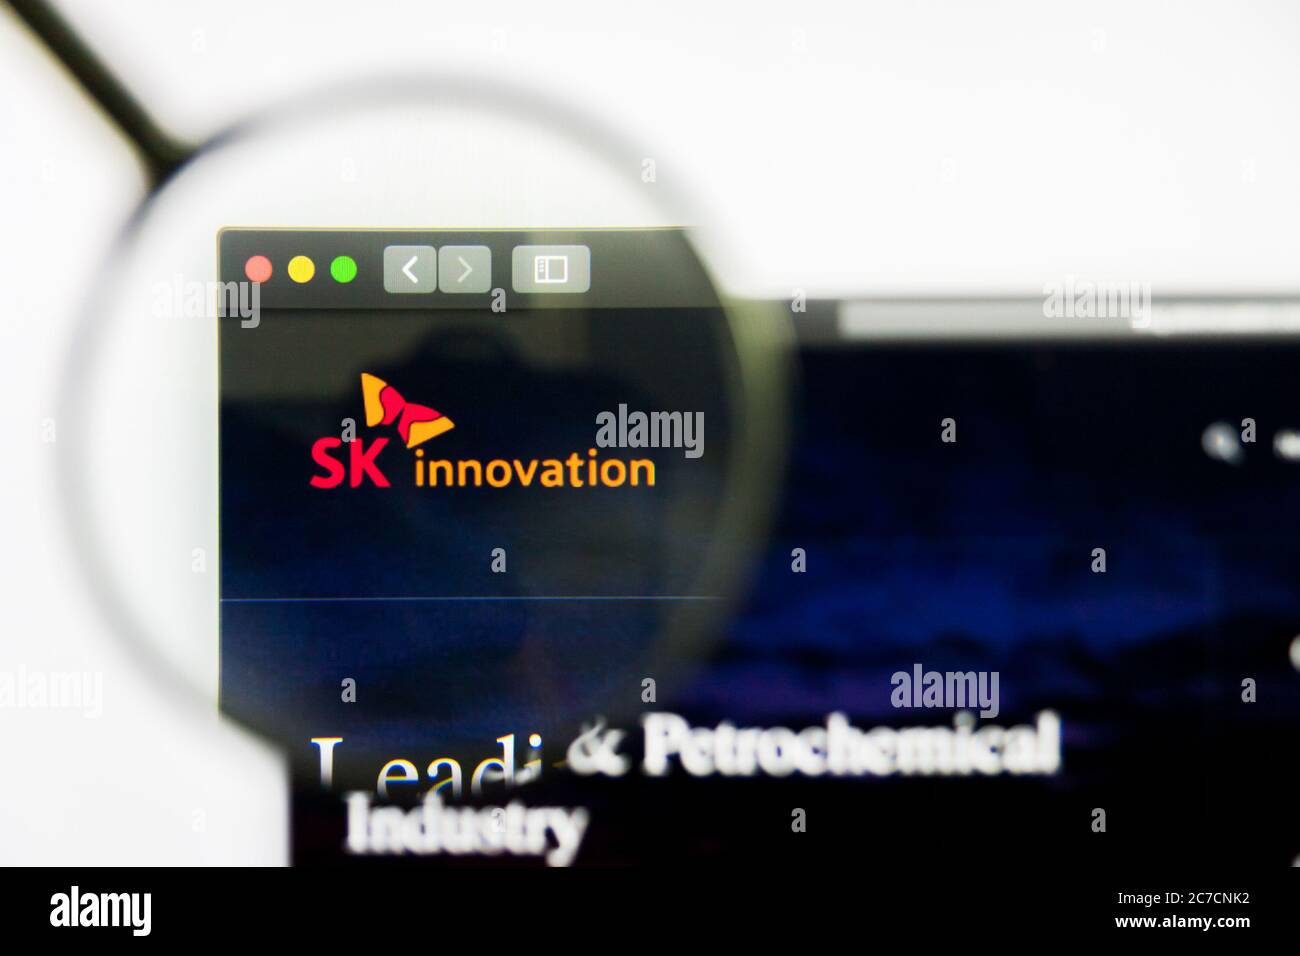 Los Angeles, California, USA - 25 March 2019: Illustrative Editorial of SK Innovation website homepage. SK Innovation logo visible on display screen. Stock Photo